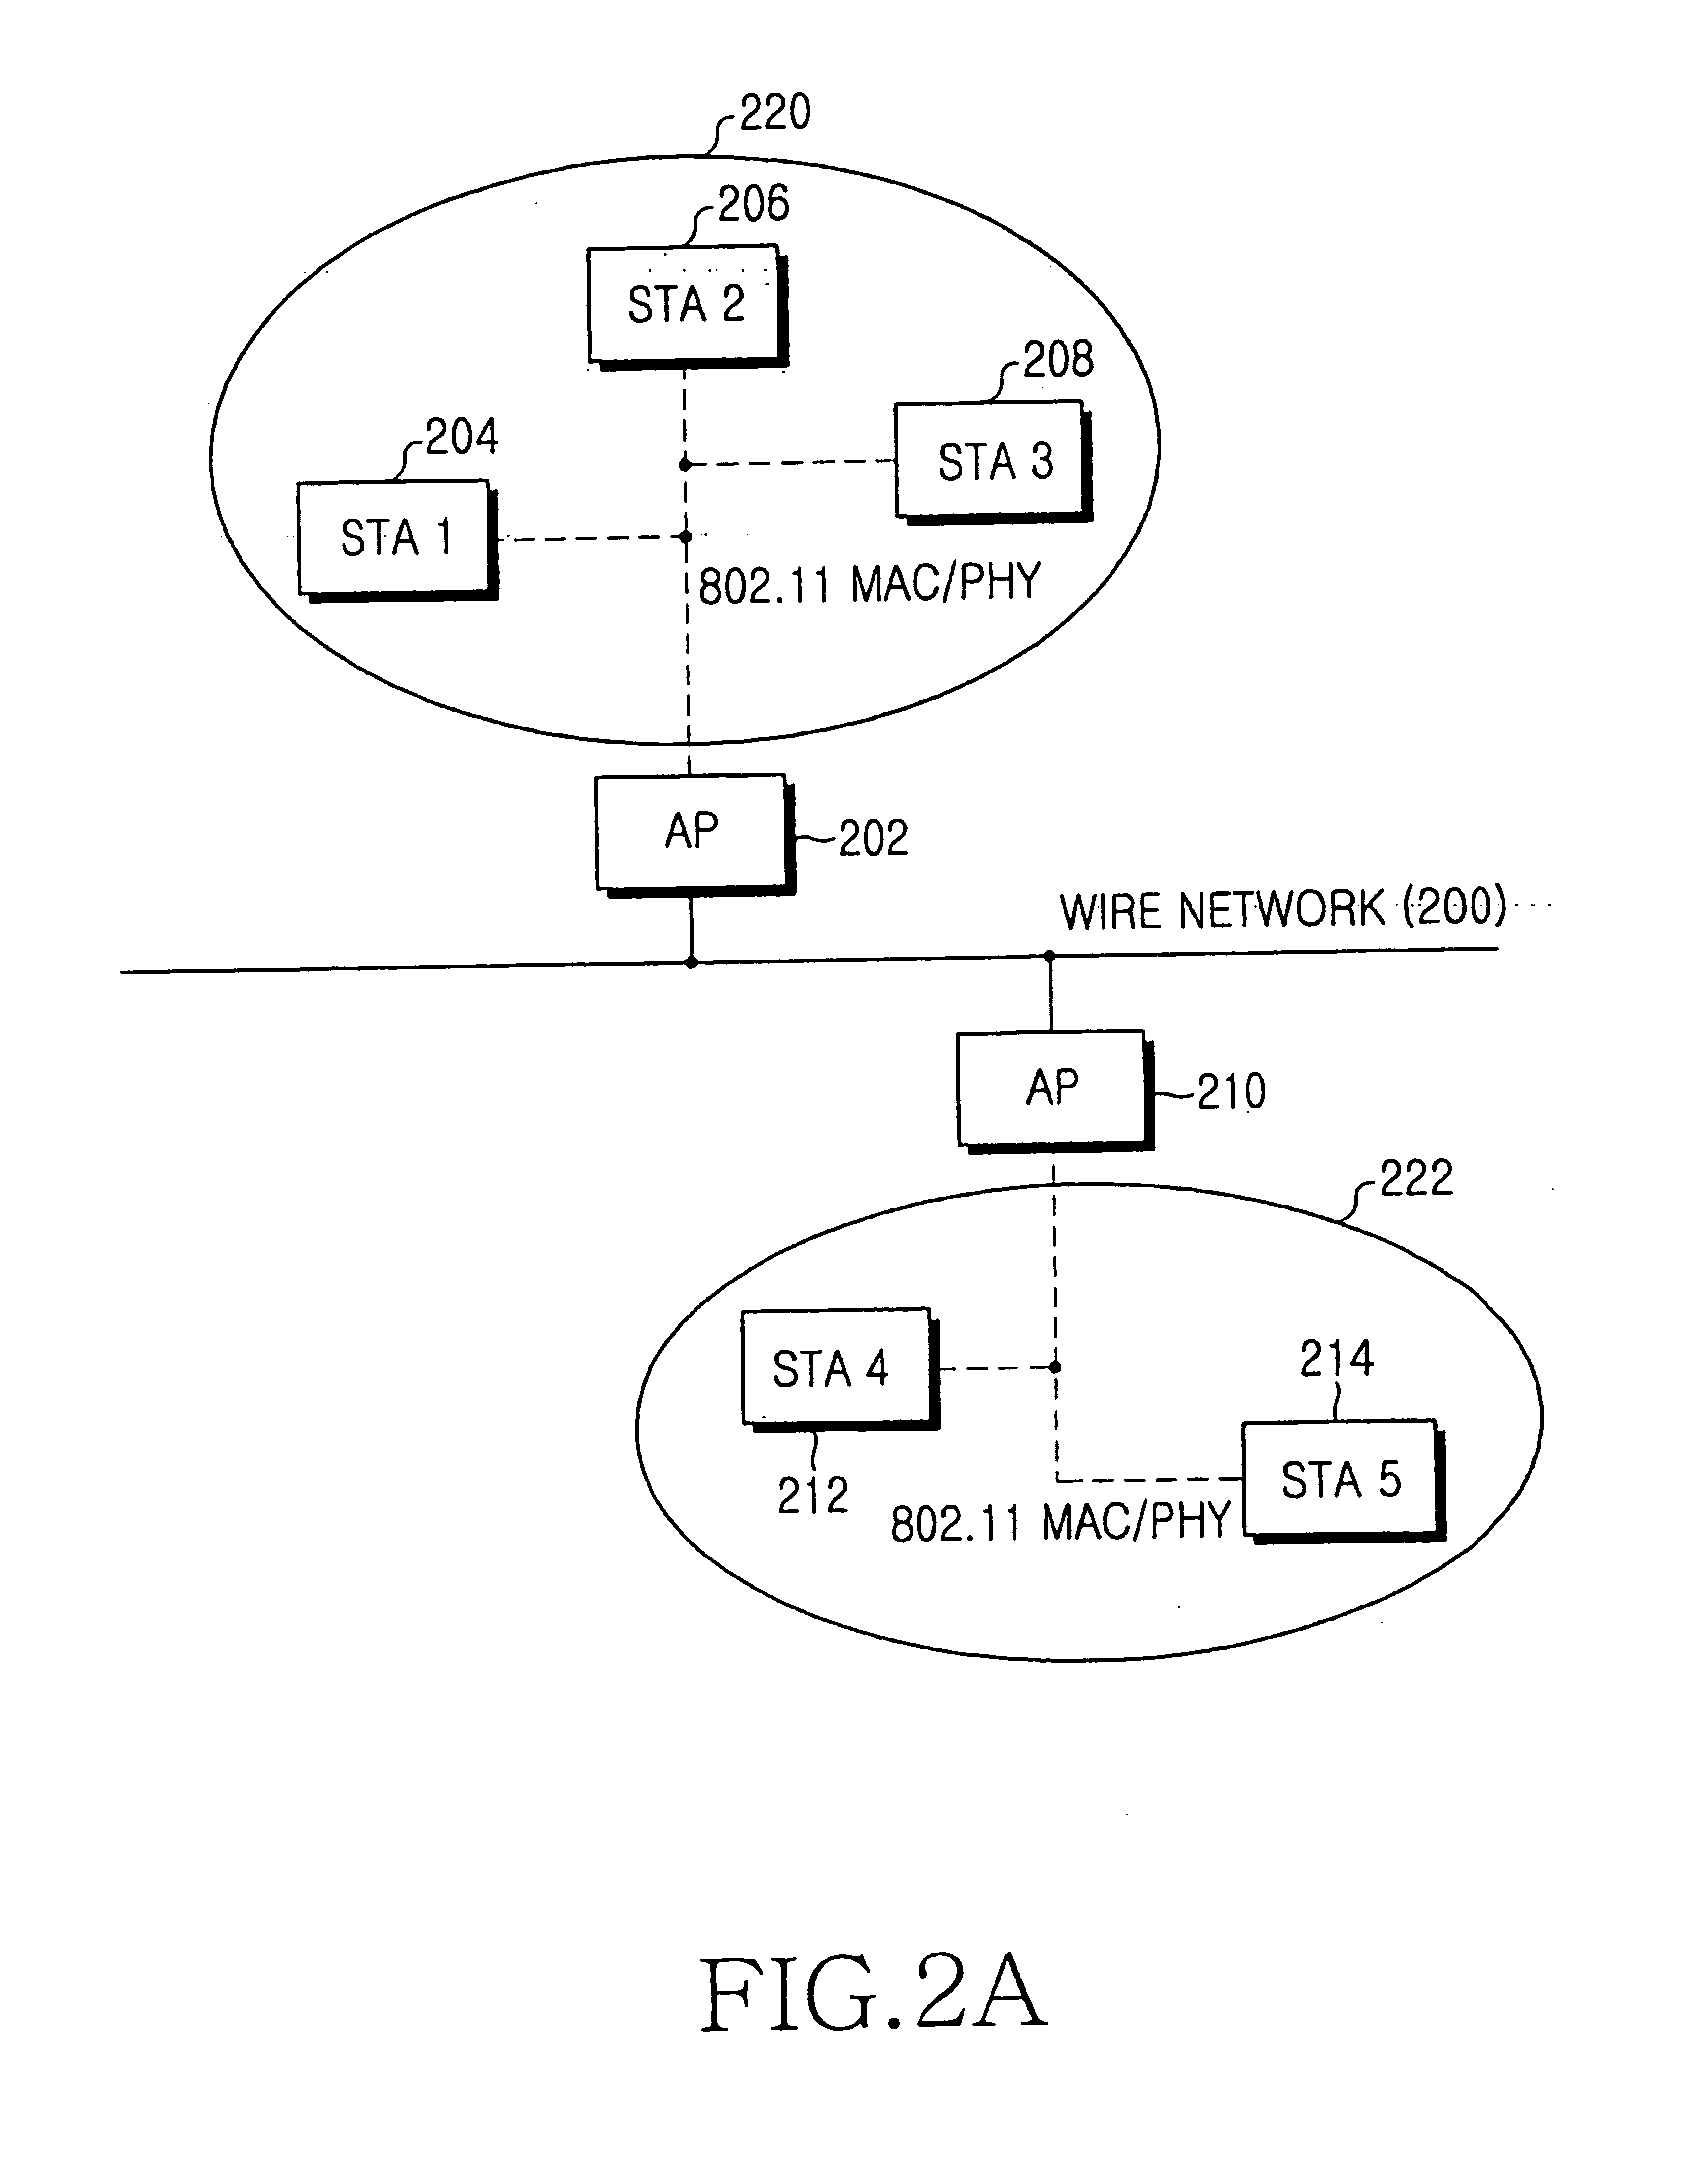 Method for allocating transmission period in a wireless communication system